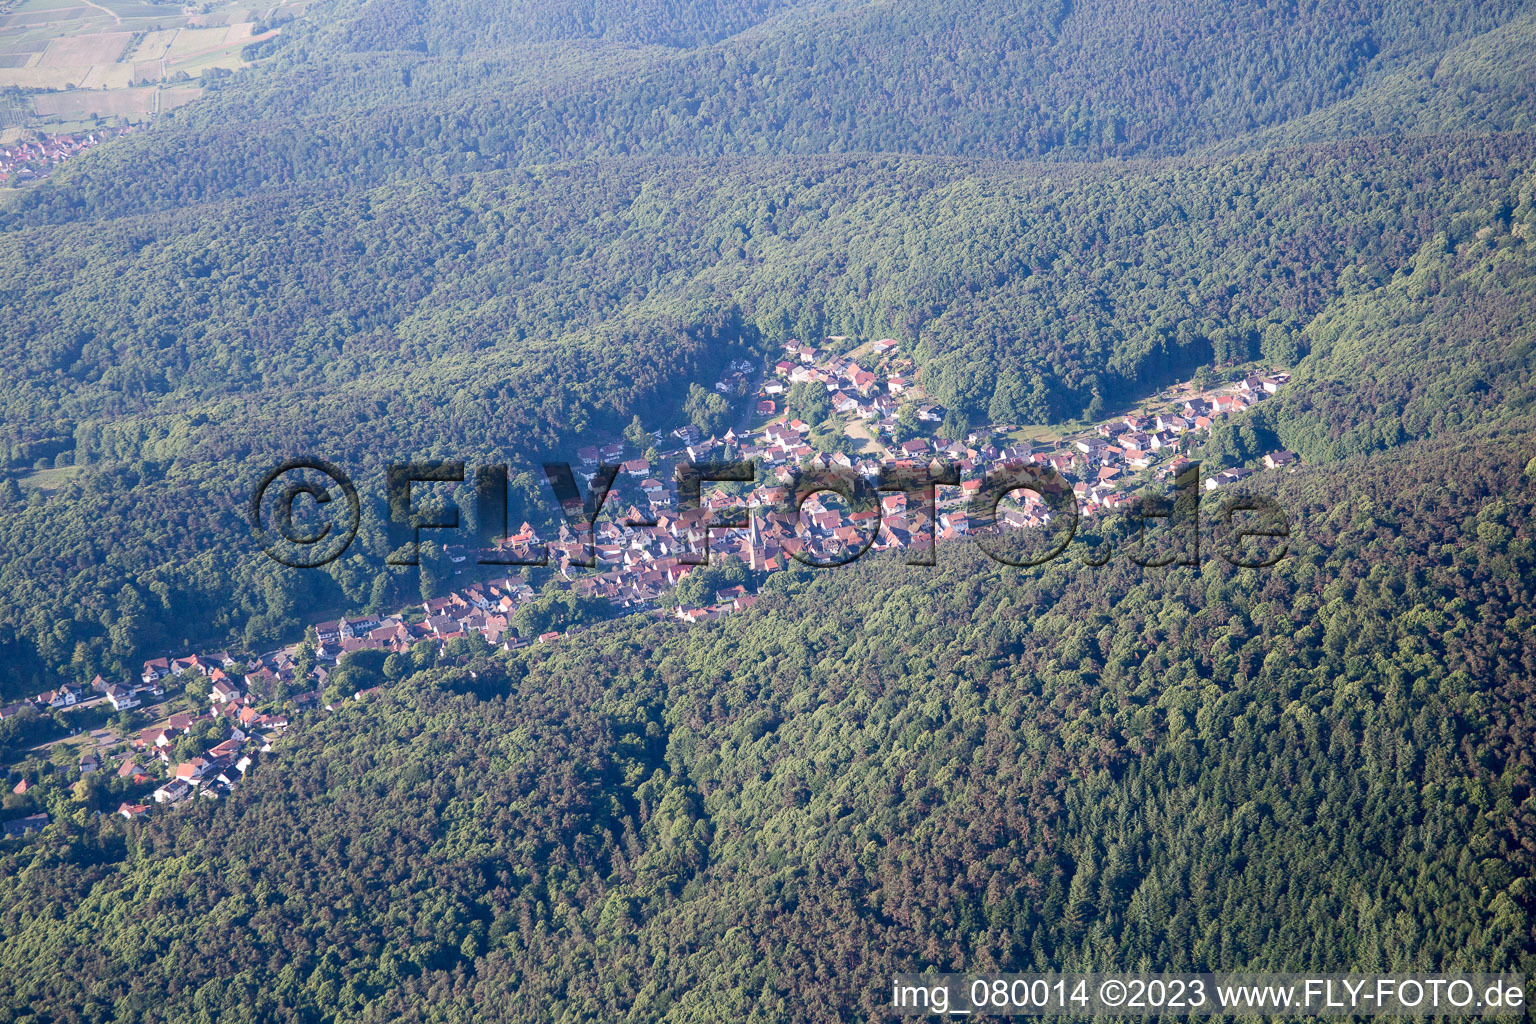 Dörrenbach in the state Rhineland-Palatinate, Germany viewn from the air